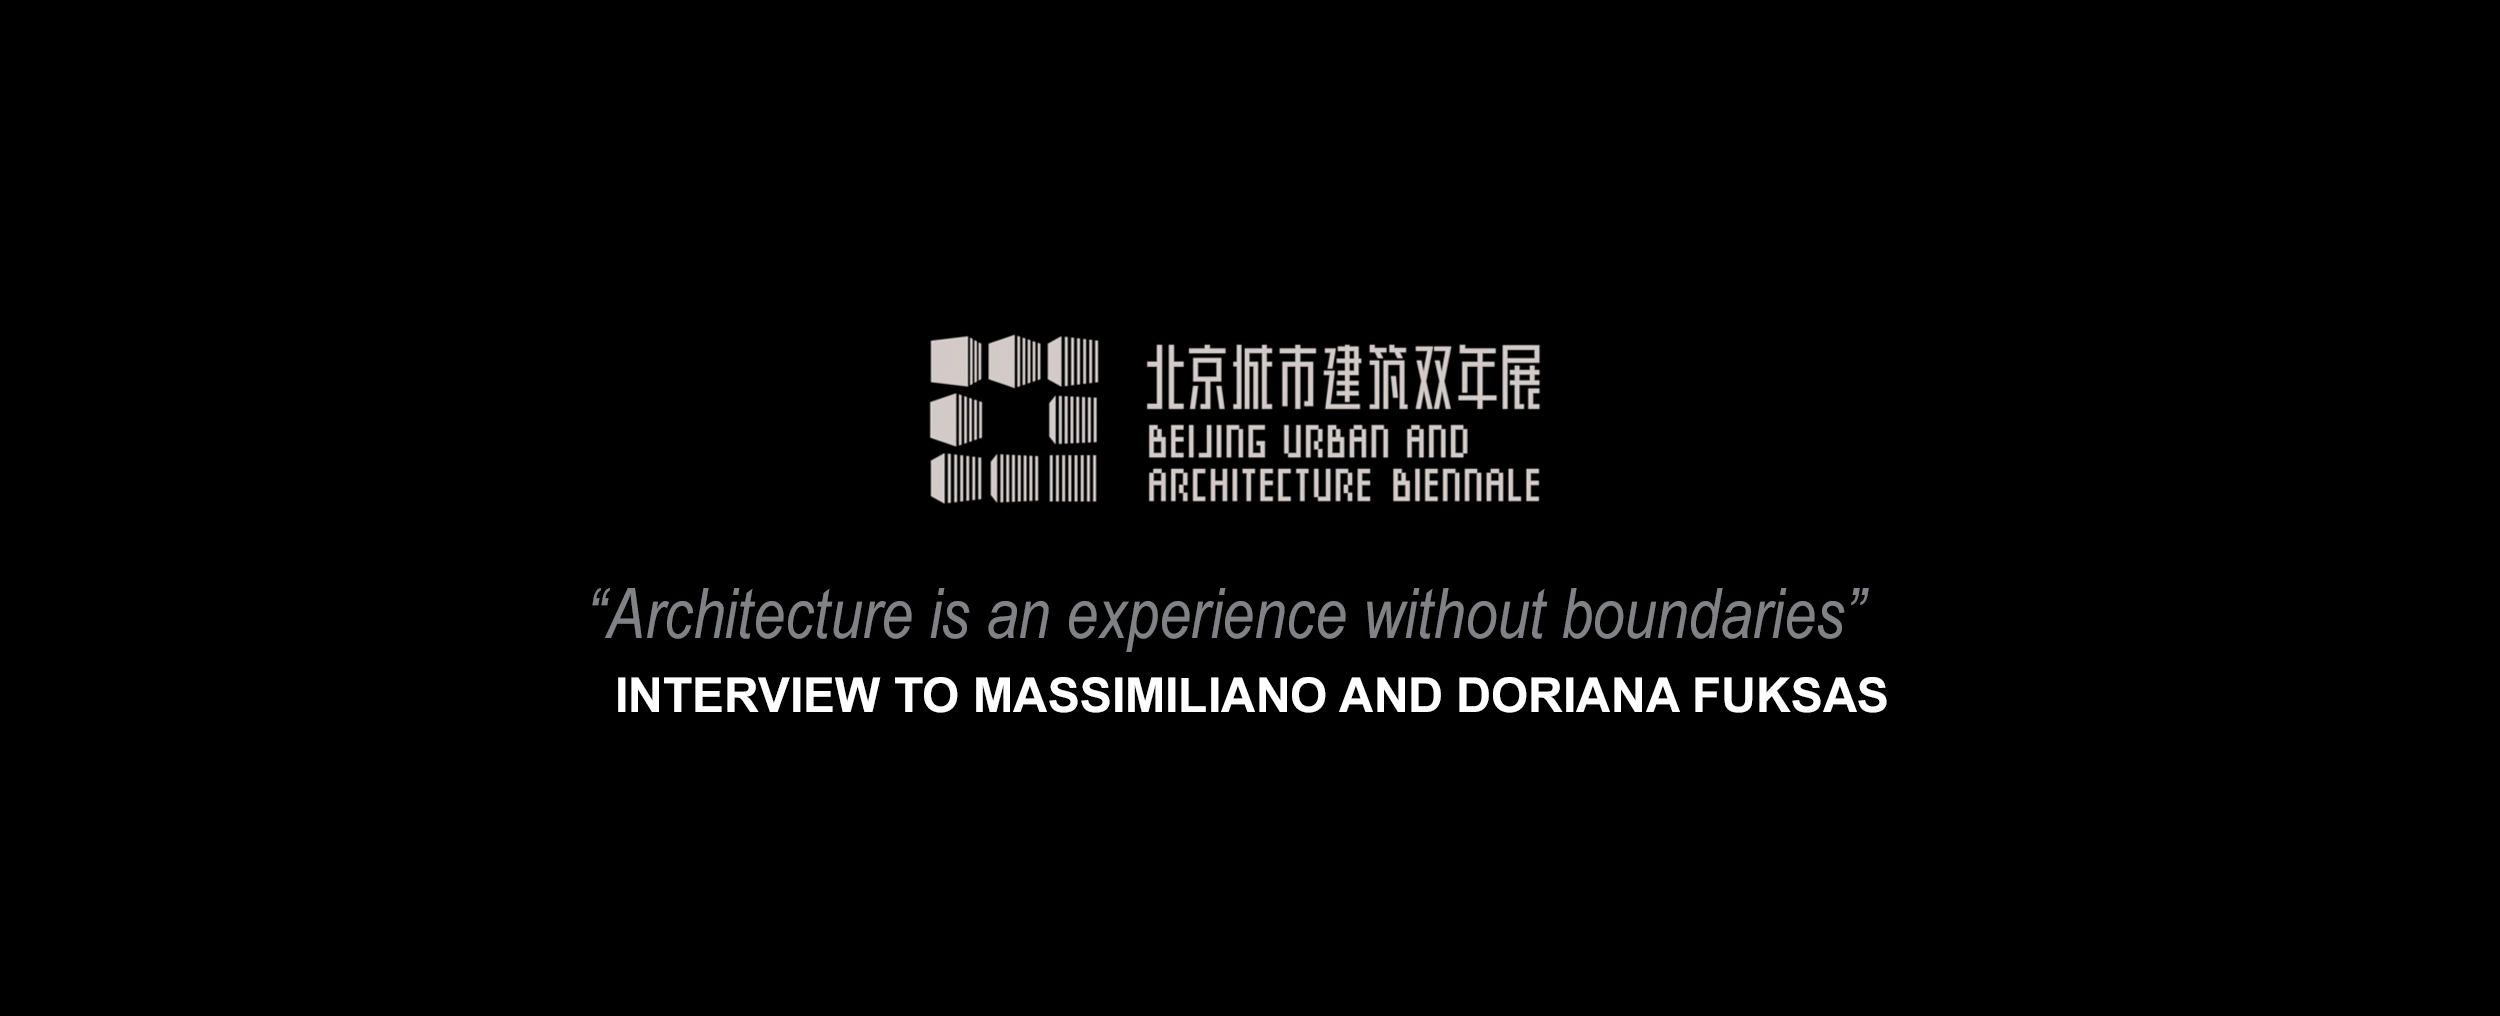 Architecture is an experience without boundaries, interview to Massimiliano and Doriana Fuksas for the BUAB Beijing Urban Architecture Biennale 20202020, September 29